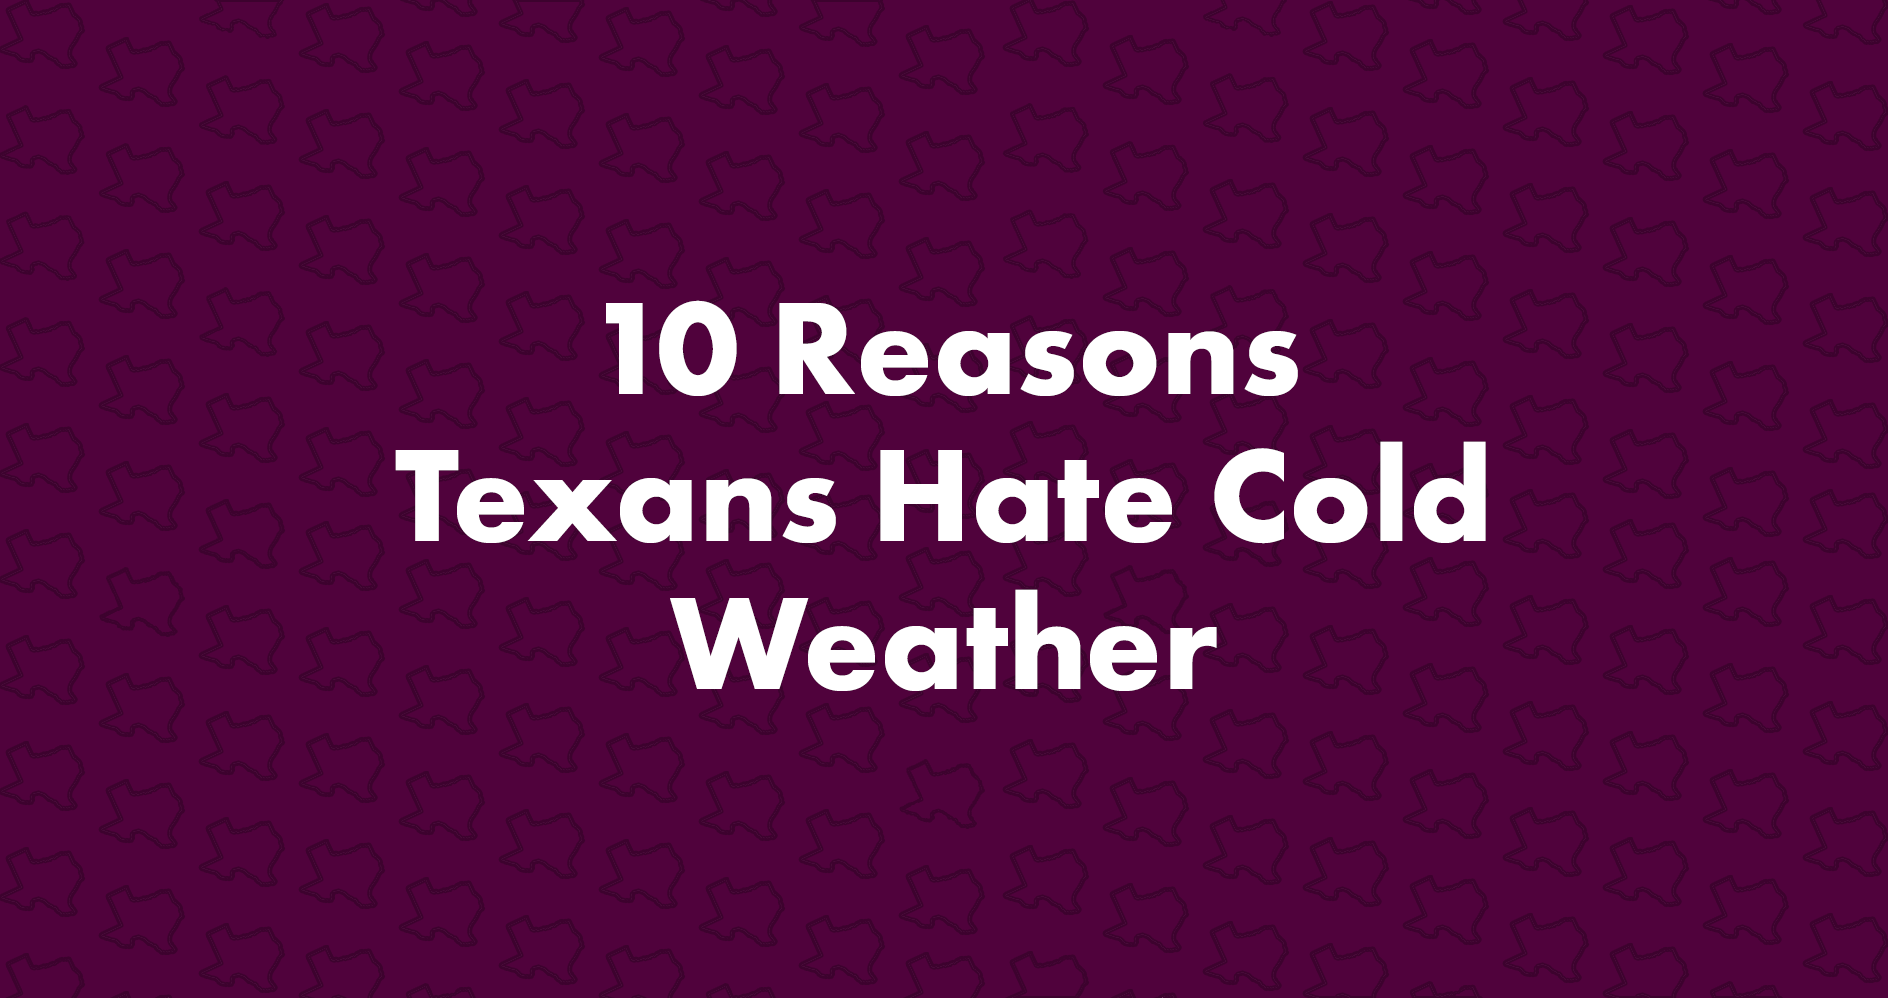 10 Reasons Texans Hate Cold Weather